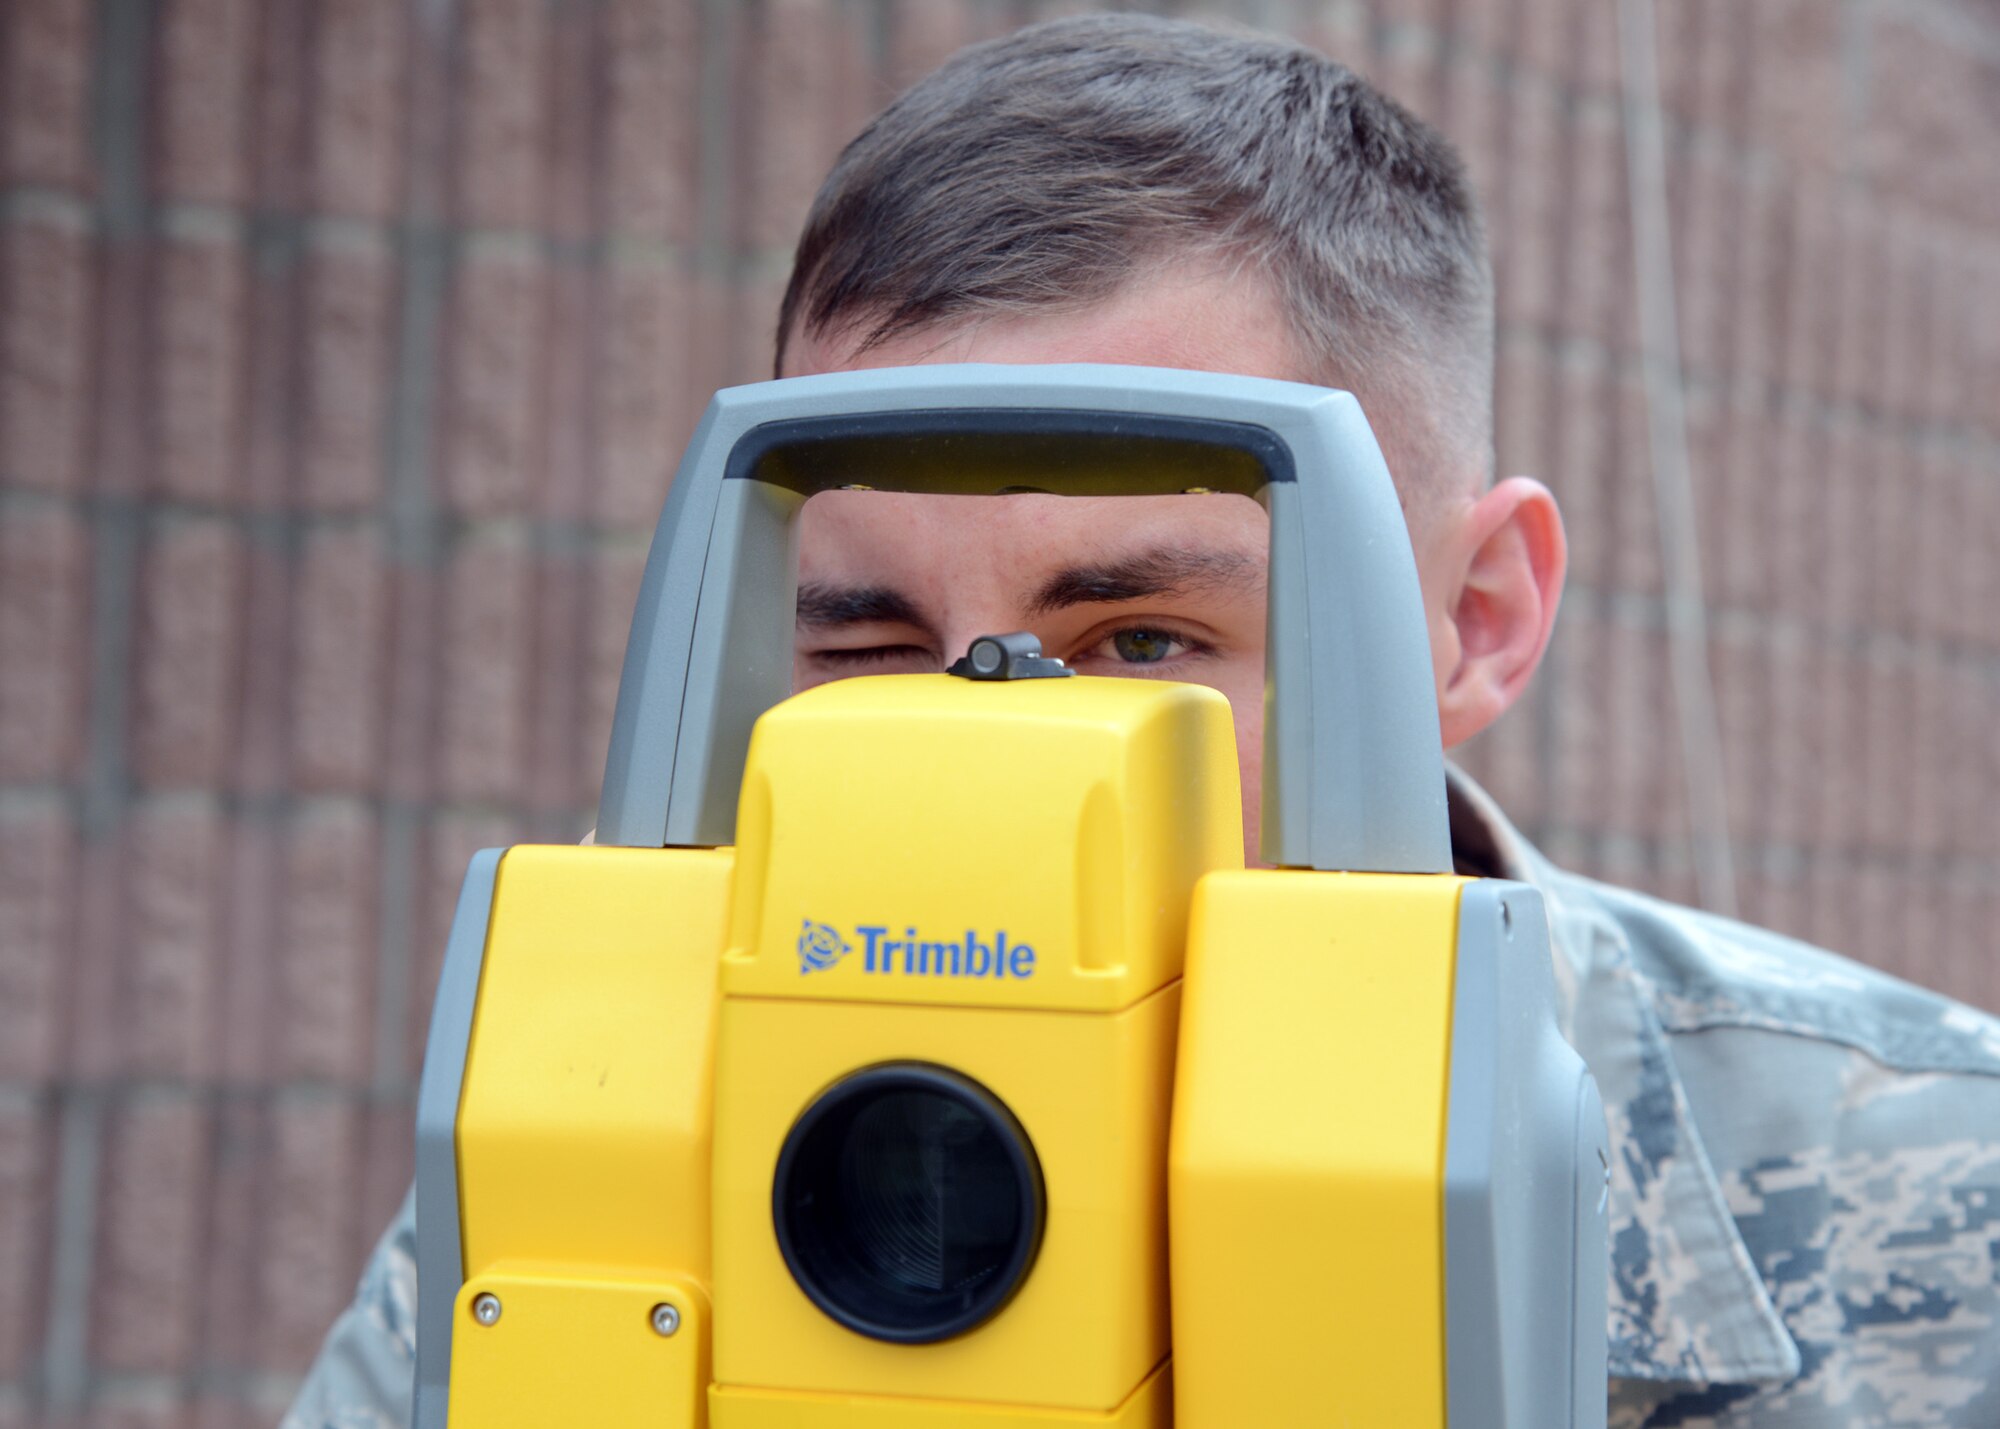 Senior Airman Ryan Holland, 56th Civil Engineer Squadron engineering technician, looks through the view finder of the Trimble Total Station 5600 during a Geographic Information Systems demonstration Nov. 16, 2016, at Luke Air Force Base, Ariz. Holland and the 56th CES engineering flight is in charge of developing maps and sketching plans for events such as an airshow or wing level events. (U.S. Air Force photo by Senior Airman Devante Williams)